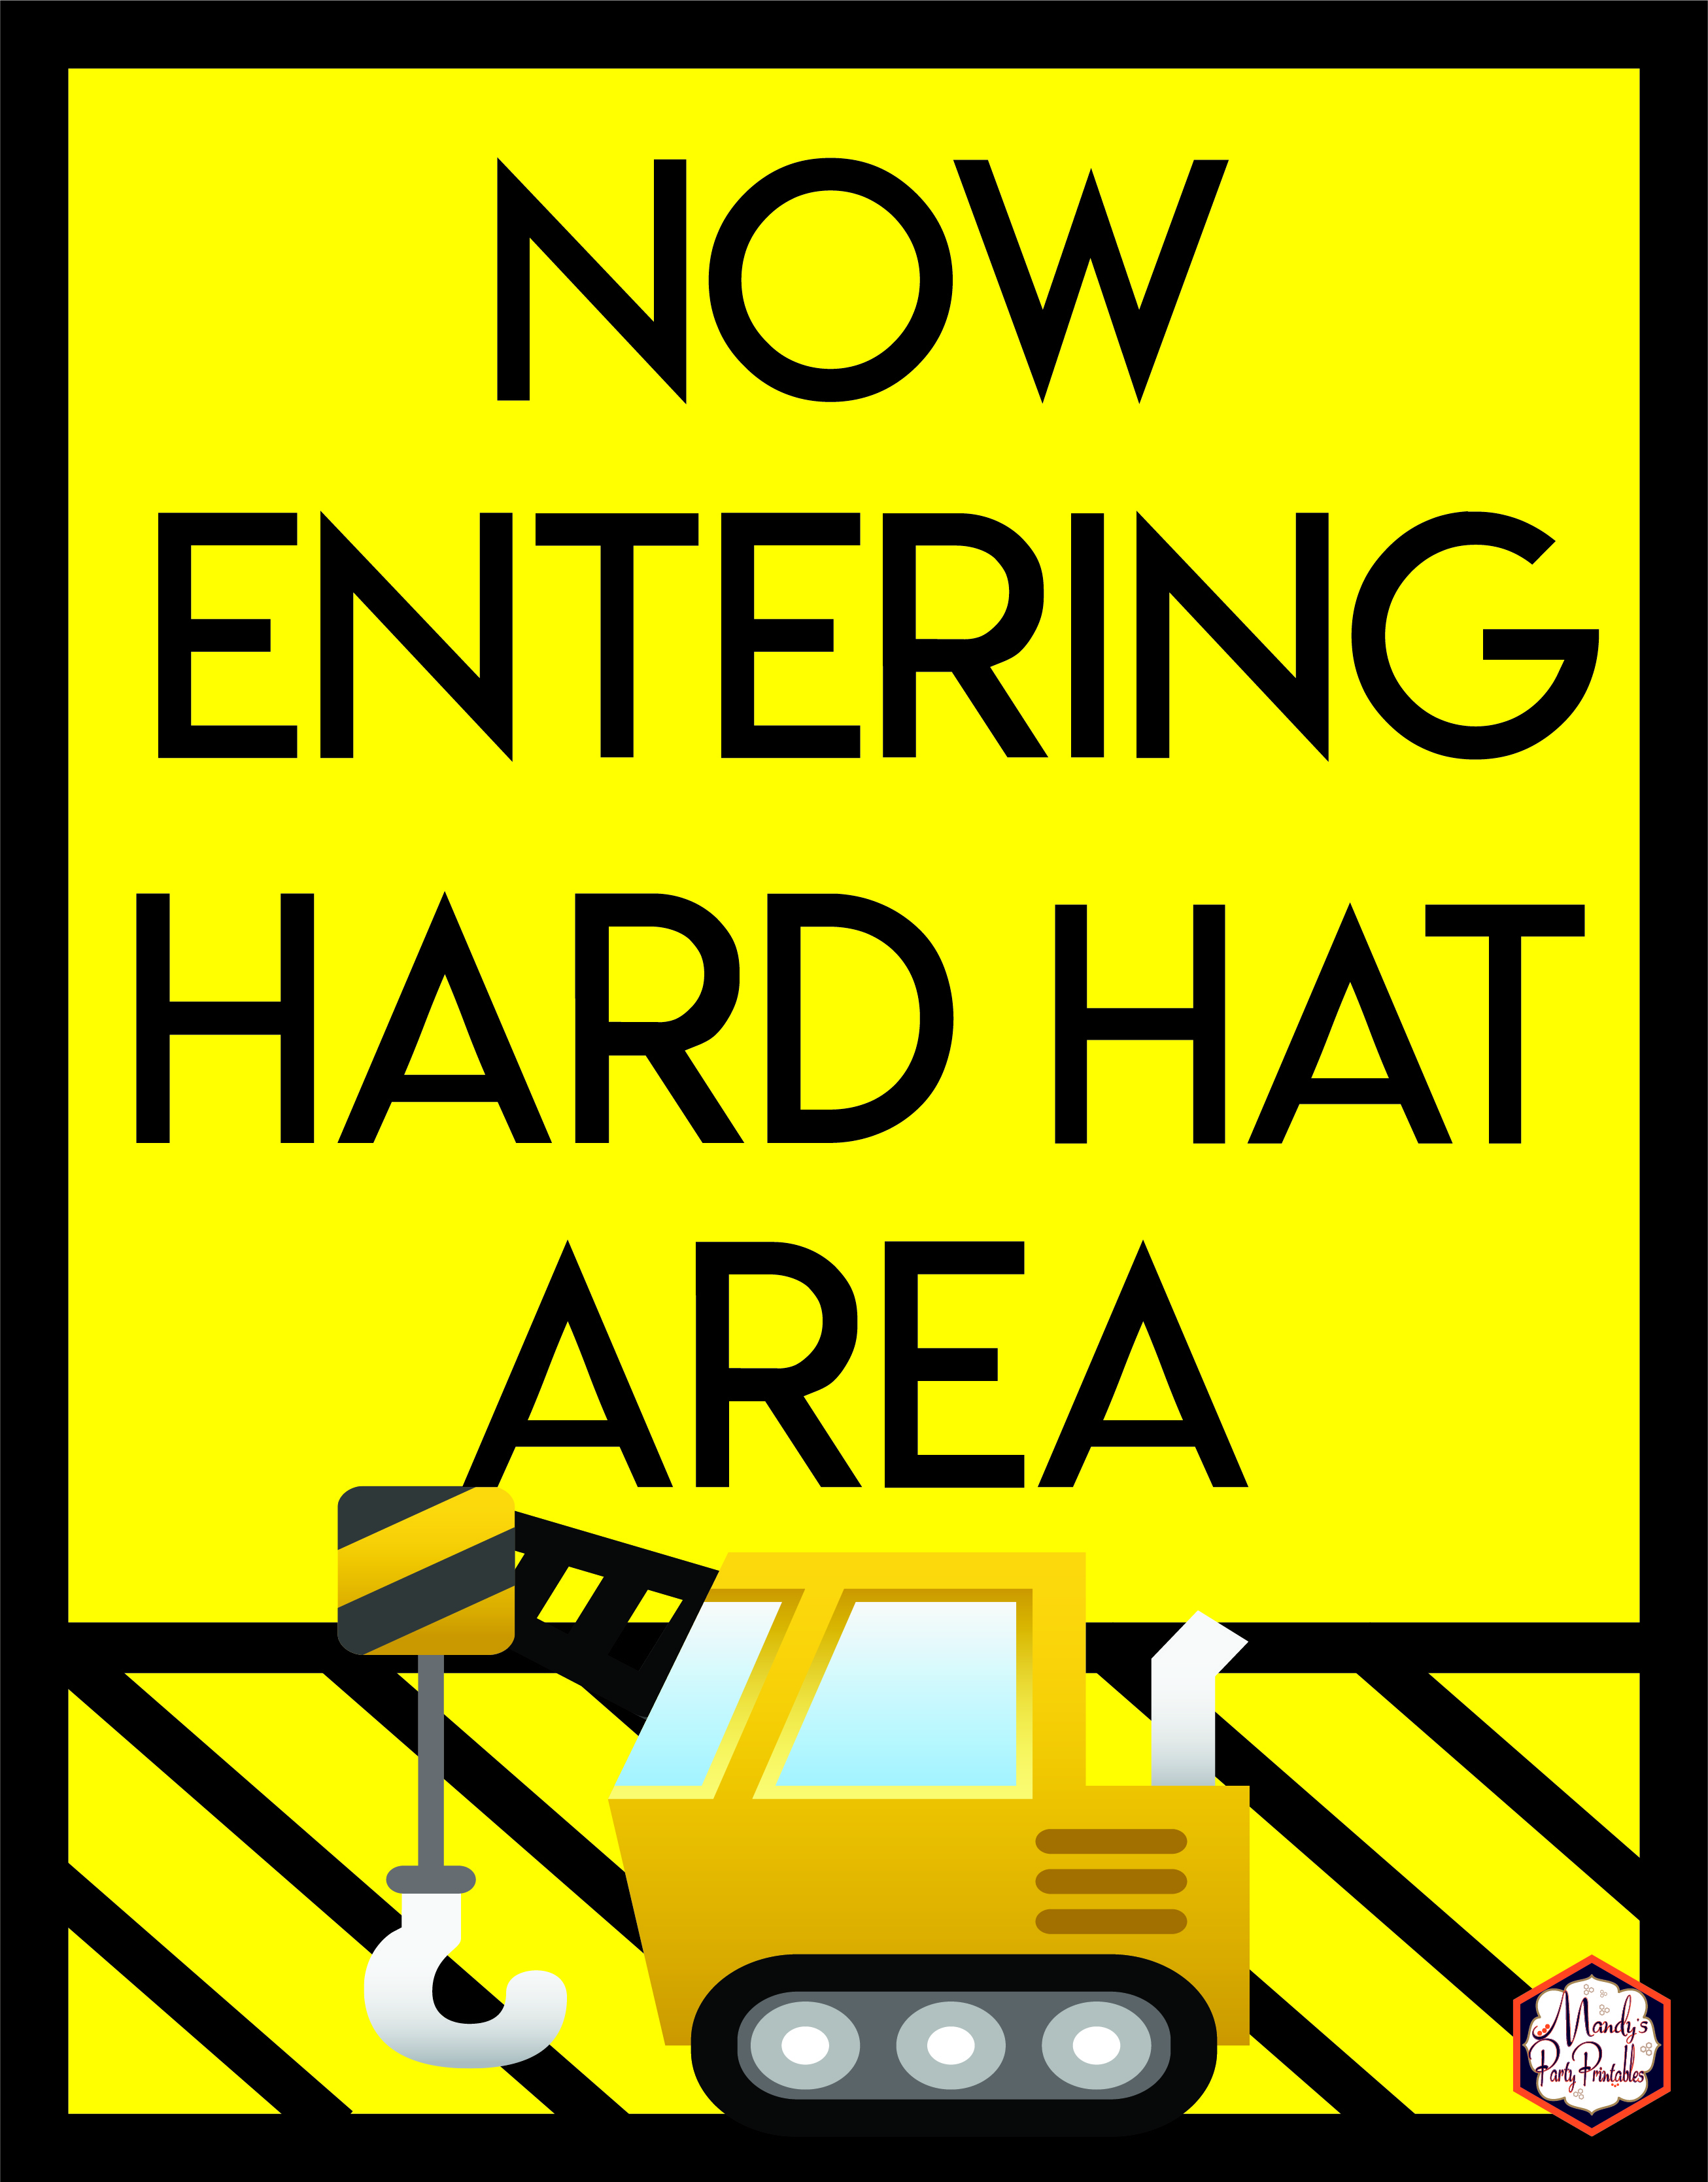 Now Entering Hard Hat Area Sign from Construction Birthday Party Printables via Mandy's Party Printables